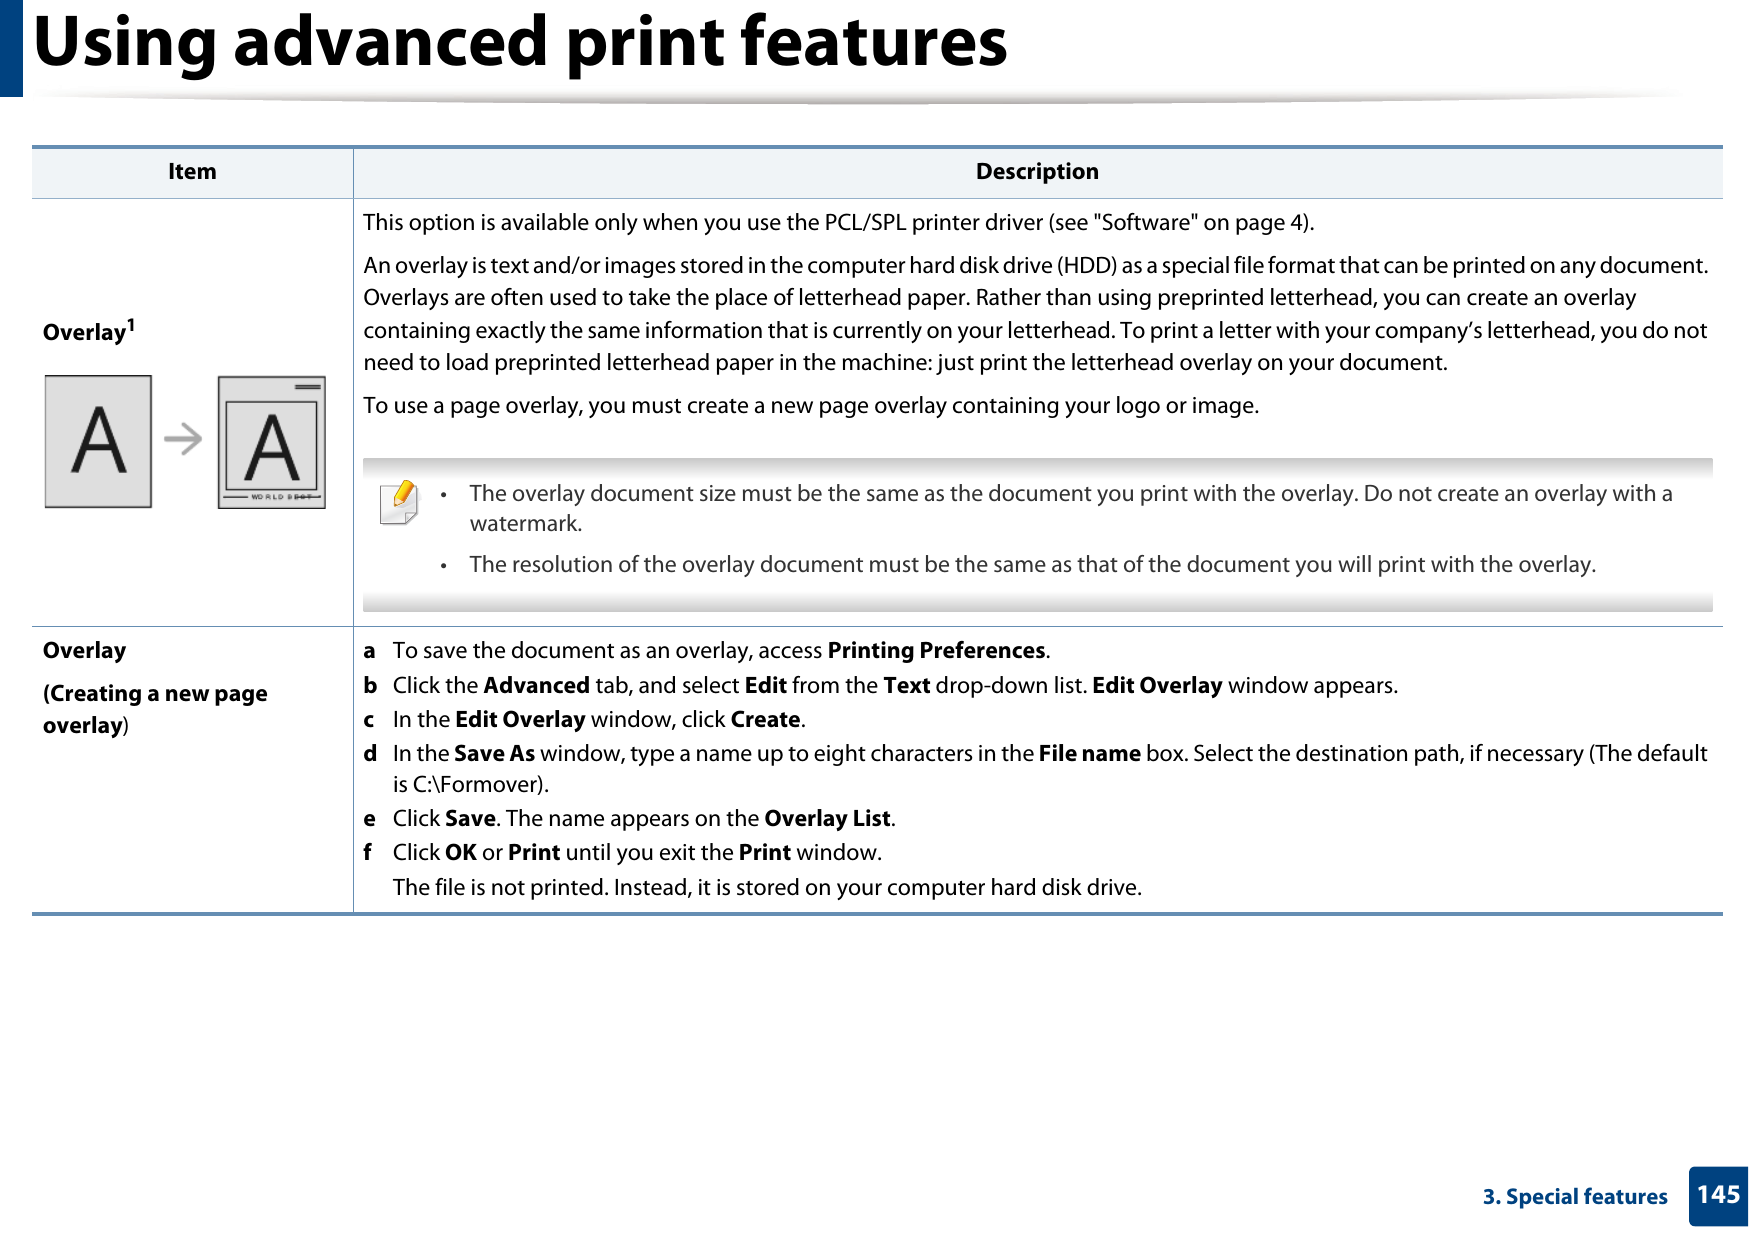 Using advanced print features1453. Special featuresOverlay1This option is available only when you use the PCL/SPL printer driver (see &quot;Software&quot; on page 4).An overlay is text and/or images stored in the computer hard disk drive (HDD) as a special file format that can be printed on any document. Overlays are often used to take the place of letterhead paper. Rather than using preprinted letterhead, you can create an overlay containing exactly the same information that is currently on your letterhead. To print a letter with your company’s letterhead, you do not need to load preprinted letterhead paper in the machine: just print the letterhead overlay on your document.To use a page overlay, you must create a new page overlay containing your logo or image. • The overlay document size must be the same as the document you print with the overlay. Do not create an overlay with a watermark.• The resolution of the overlay document must be the same as that of the document you will print with the overlay. Overlay(Creating a new page overlay)a  To save the document as an overlay, access Printing Preferences.b  Click the Advanced tab, and select Edit from the Text drop-down list. Edit Overlay window appears.c  In the Edit Overlay window, click Create. d  In the Save As window, type a name up to eight characters in the File name box. Select the destination path, if necessary (The default is C:\Formover).e  Click Save. The name appears on the Overlay List. f  Click OK or Print until you exit the Print window.The file is not printed. Instead, it is stored on your computer hard disk drive.Item Description